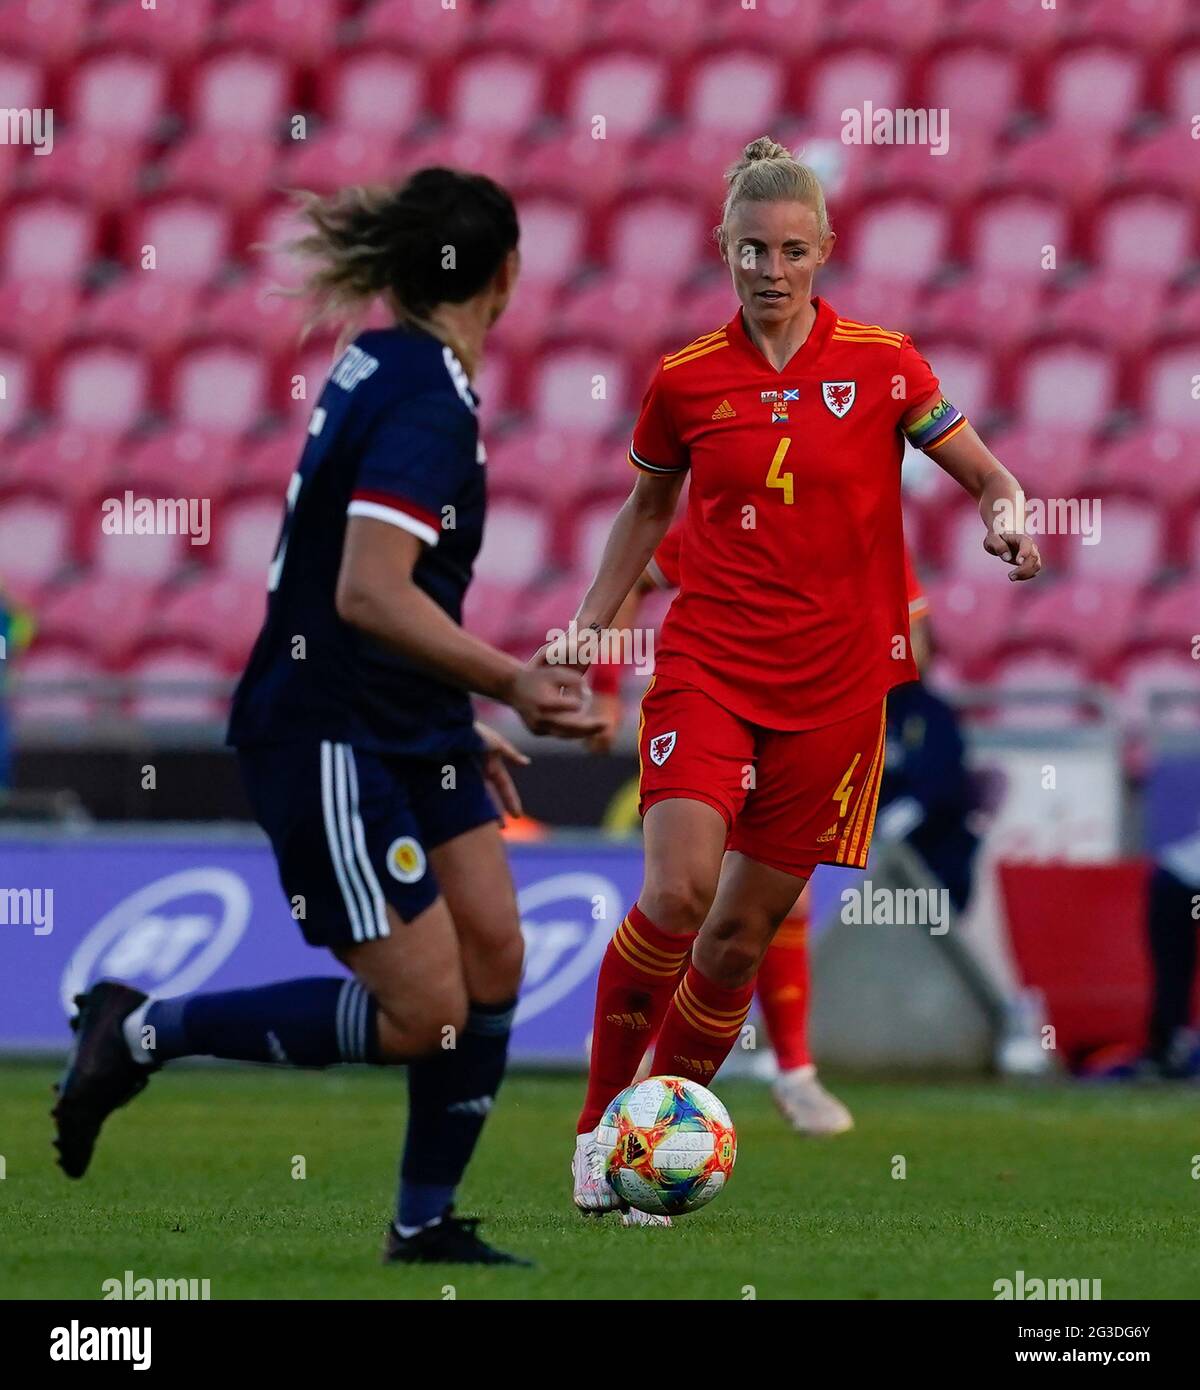 Llanelli, UK. 15th June, 2021. Brianna Westrup (L) and Sophie Ingle are seen in action during the Women's Friendly football match between Wales and Scotland at Parc Y Scarlets. (Final score; Wales 0:1Scotland). Credit: SOPA Images Limited/Alamy Live News Stock Photo